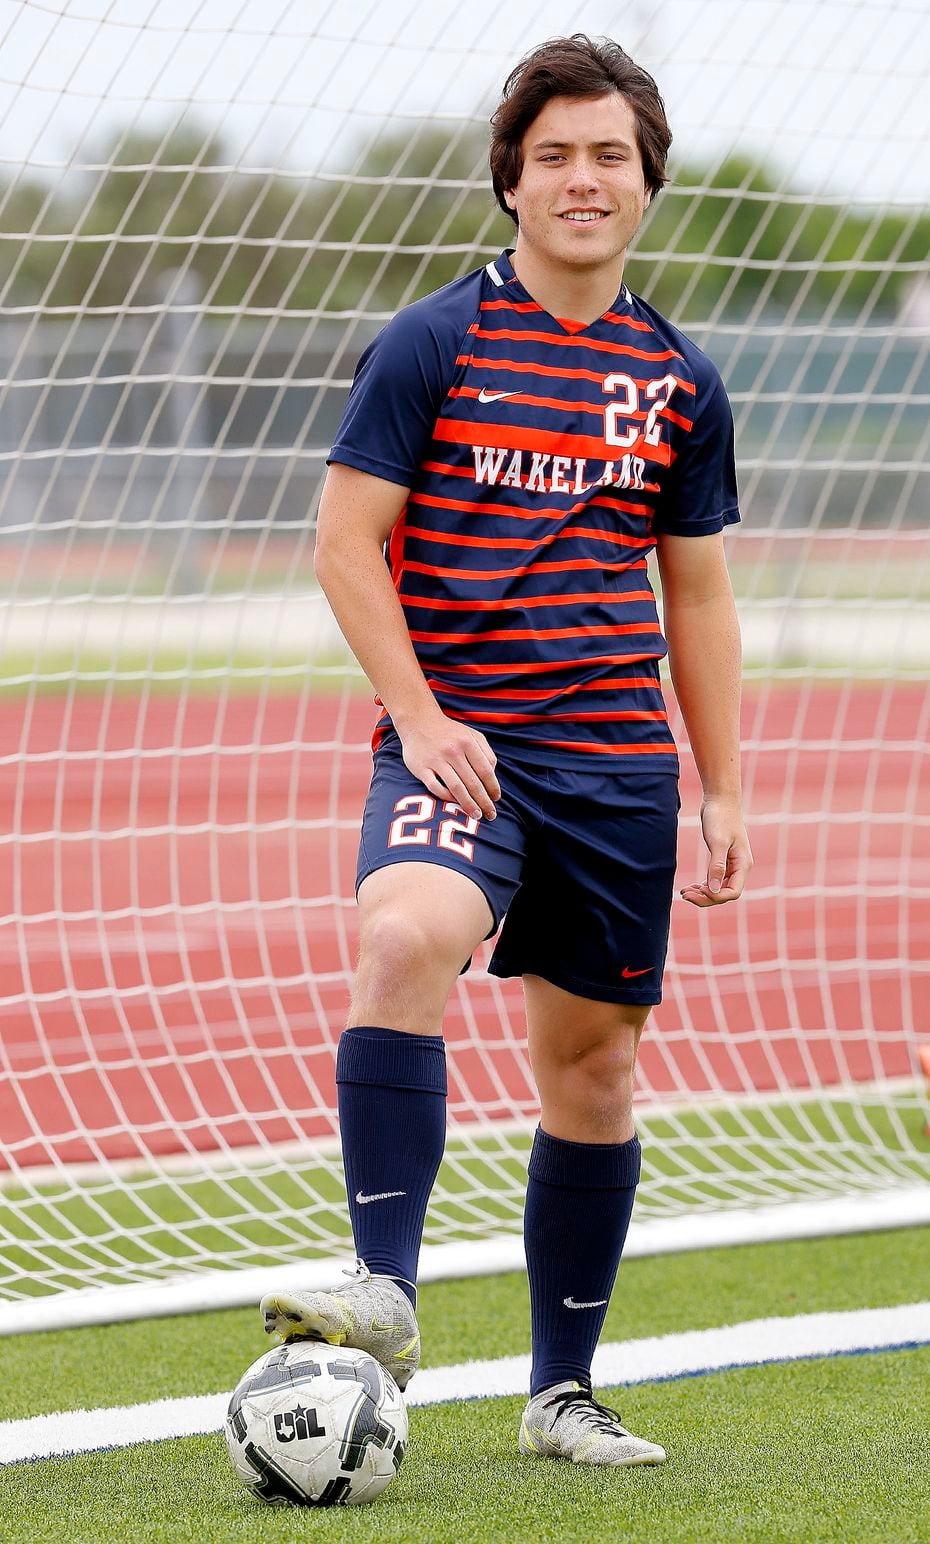 Brennan Bezdek of Wakeland High School is the 2022 Boys Soccer All-Area Player of the year,...